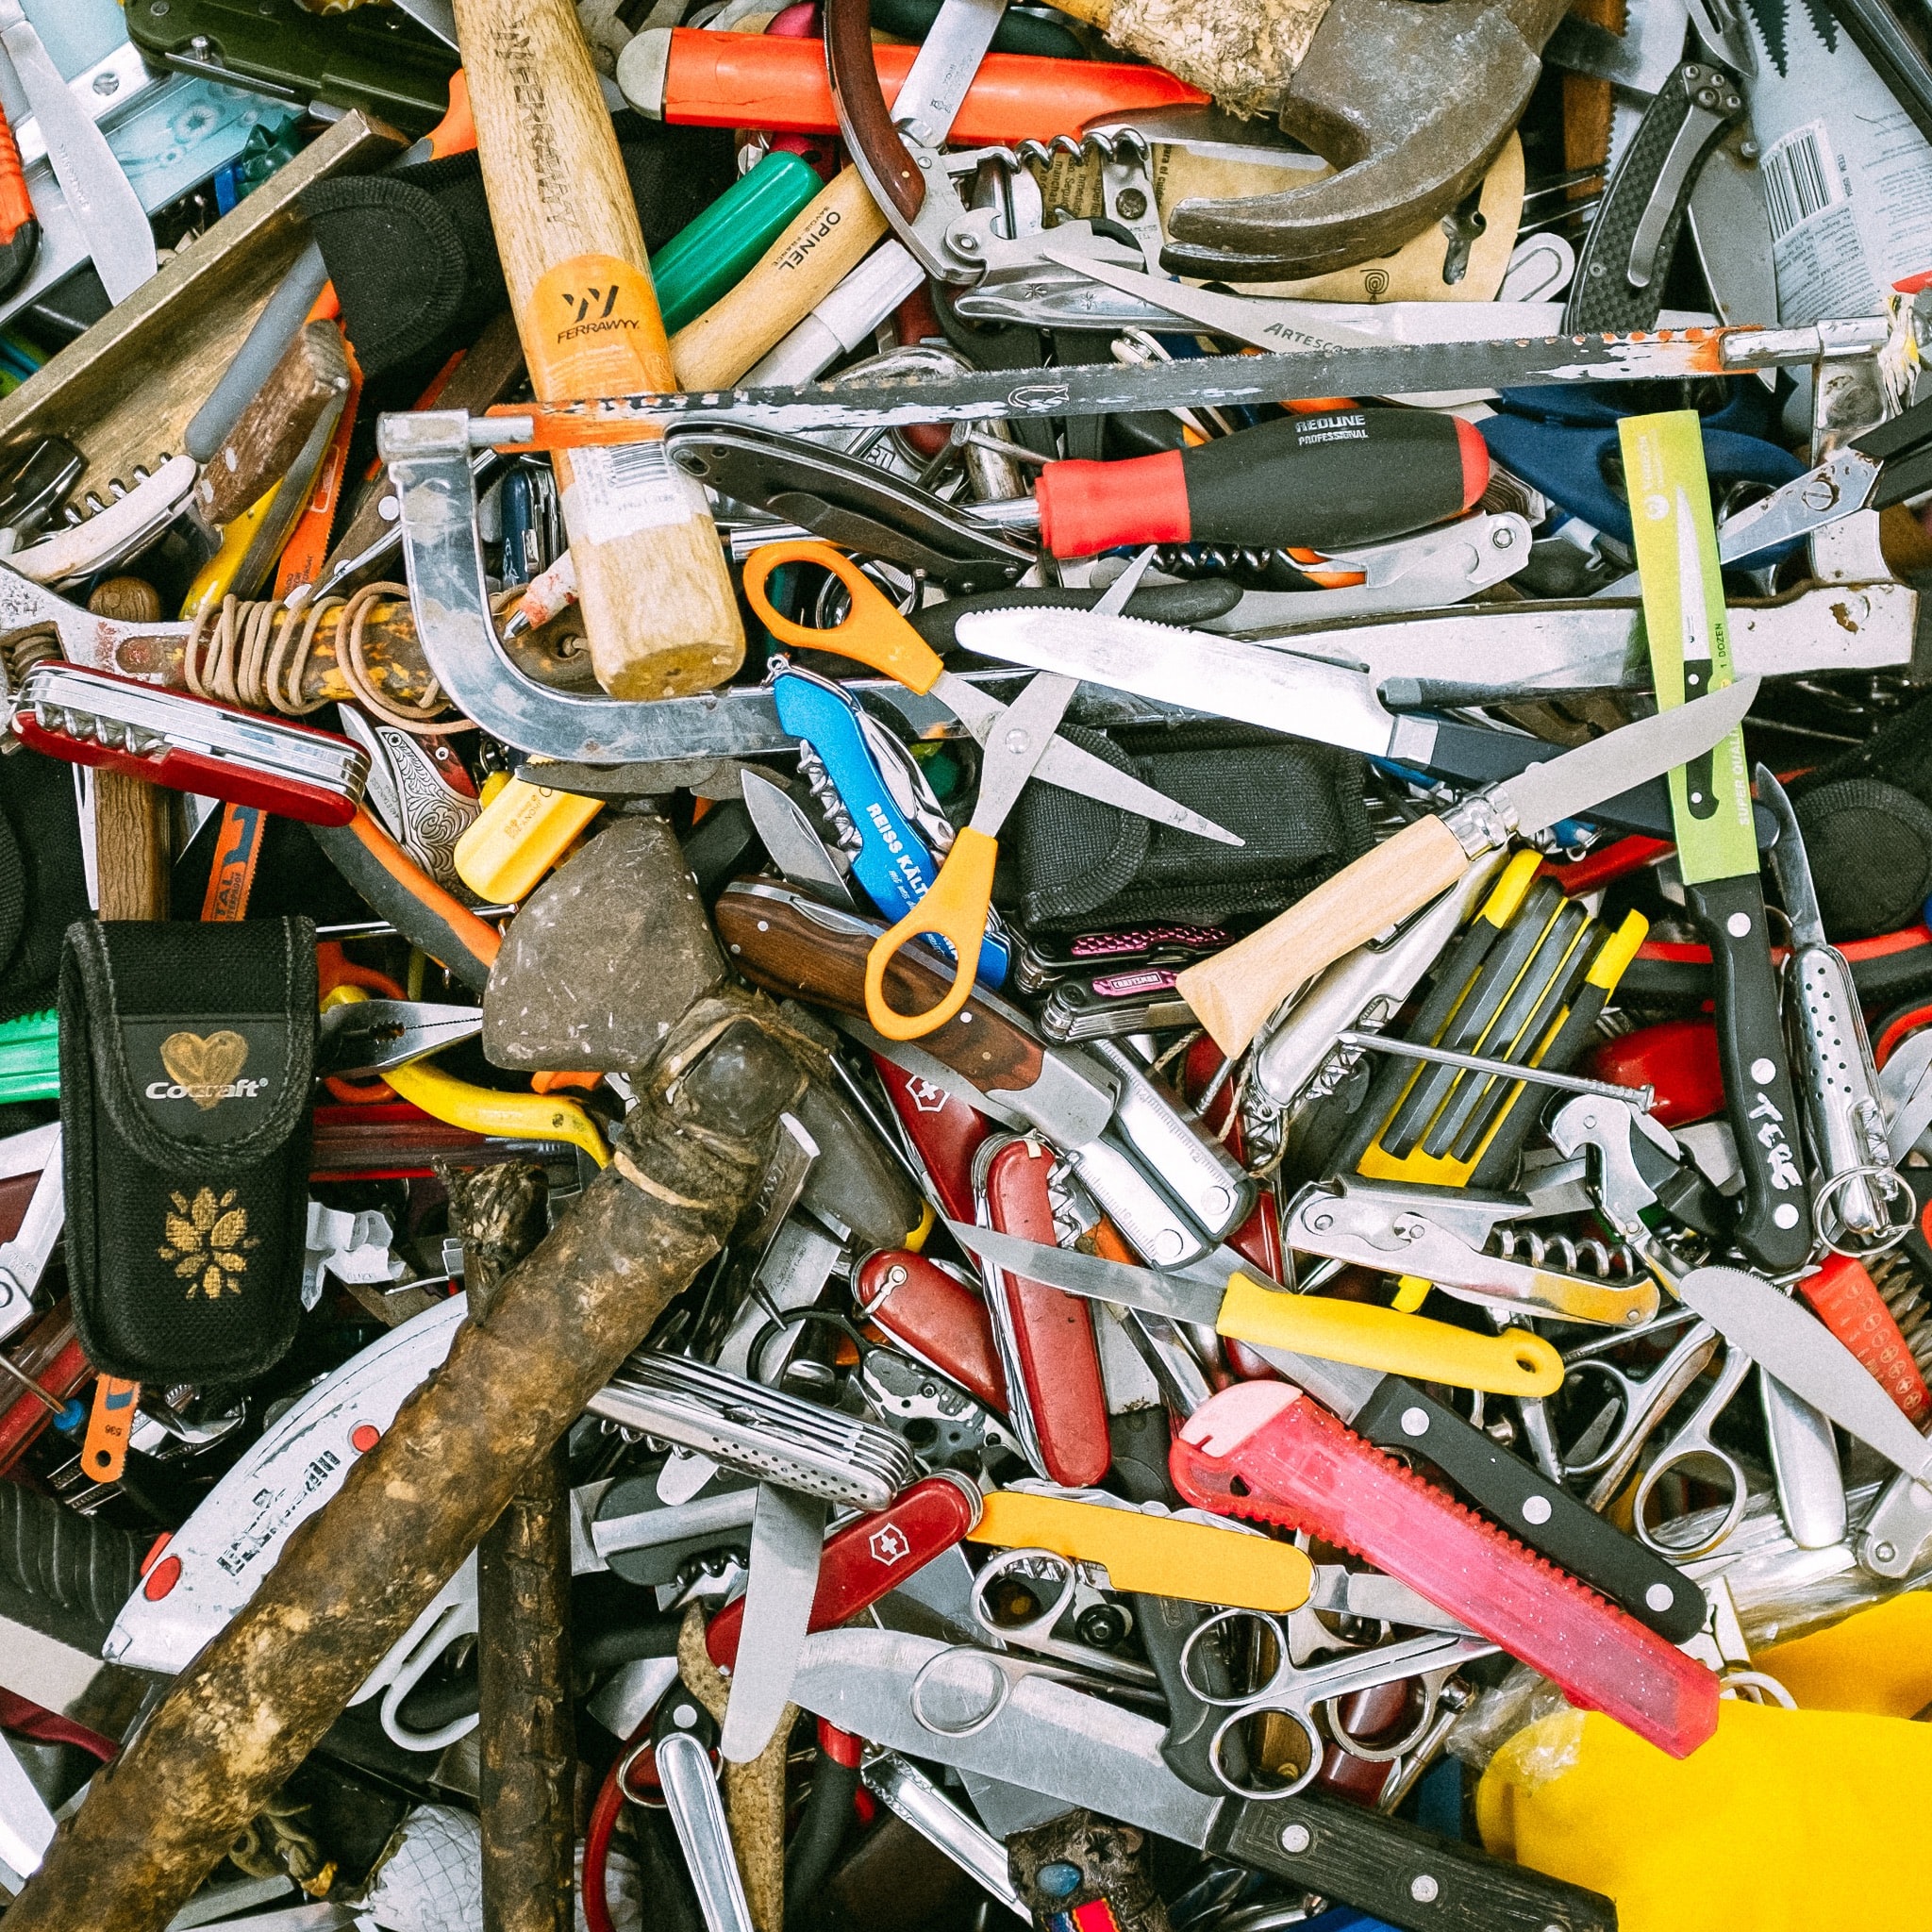 Decorative, tools in a pile